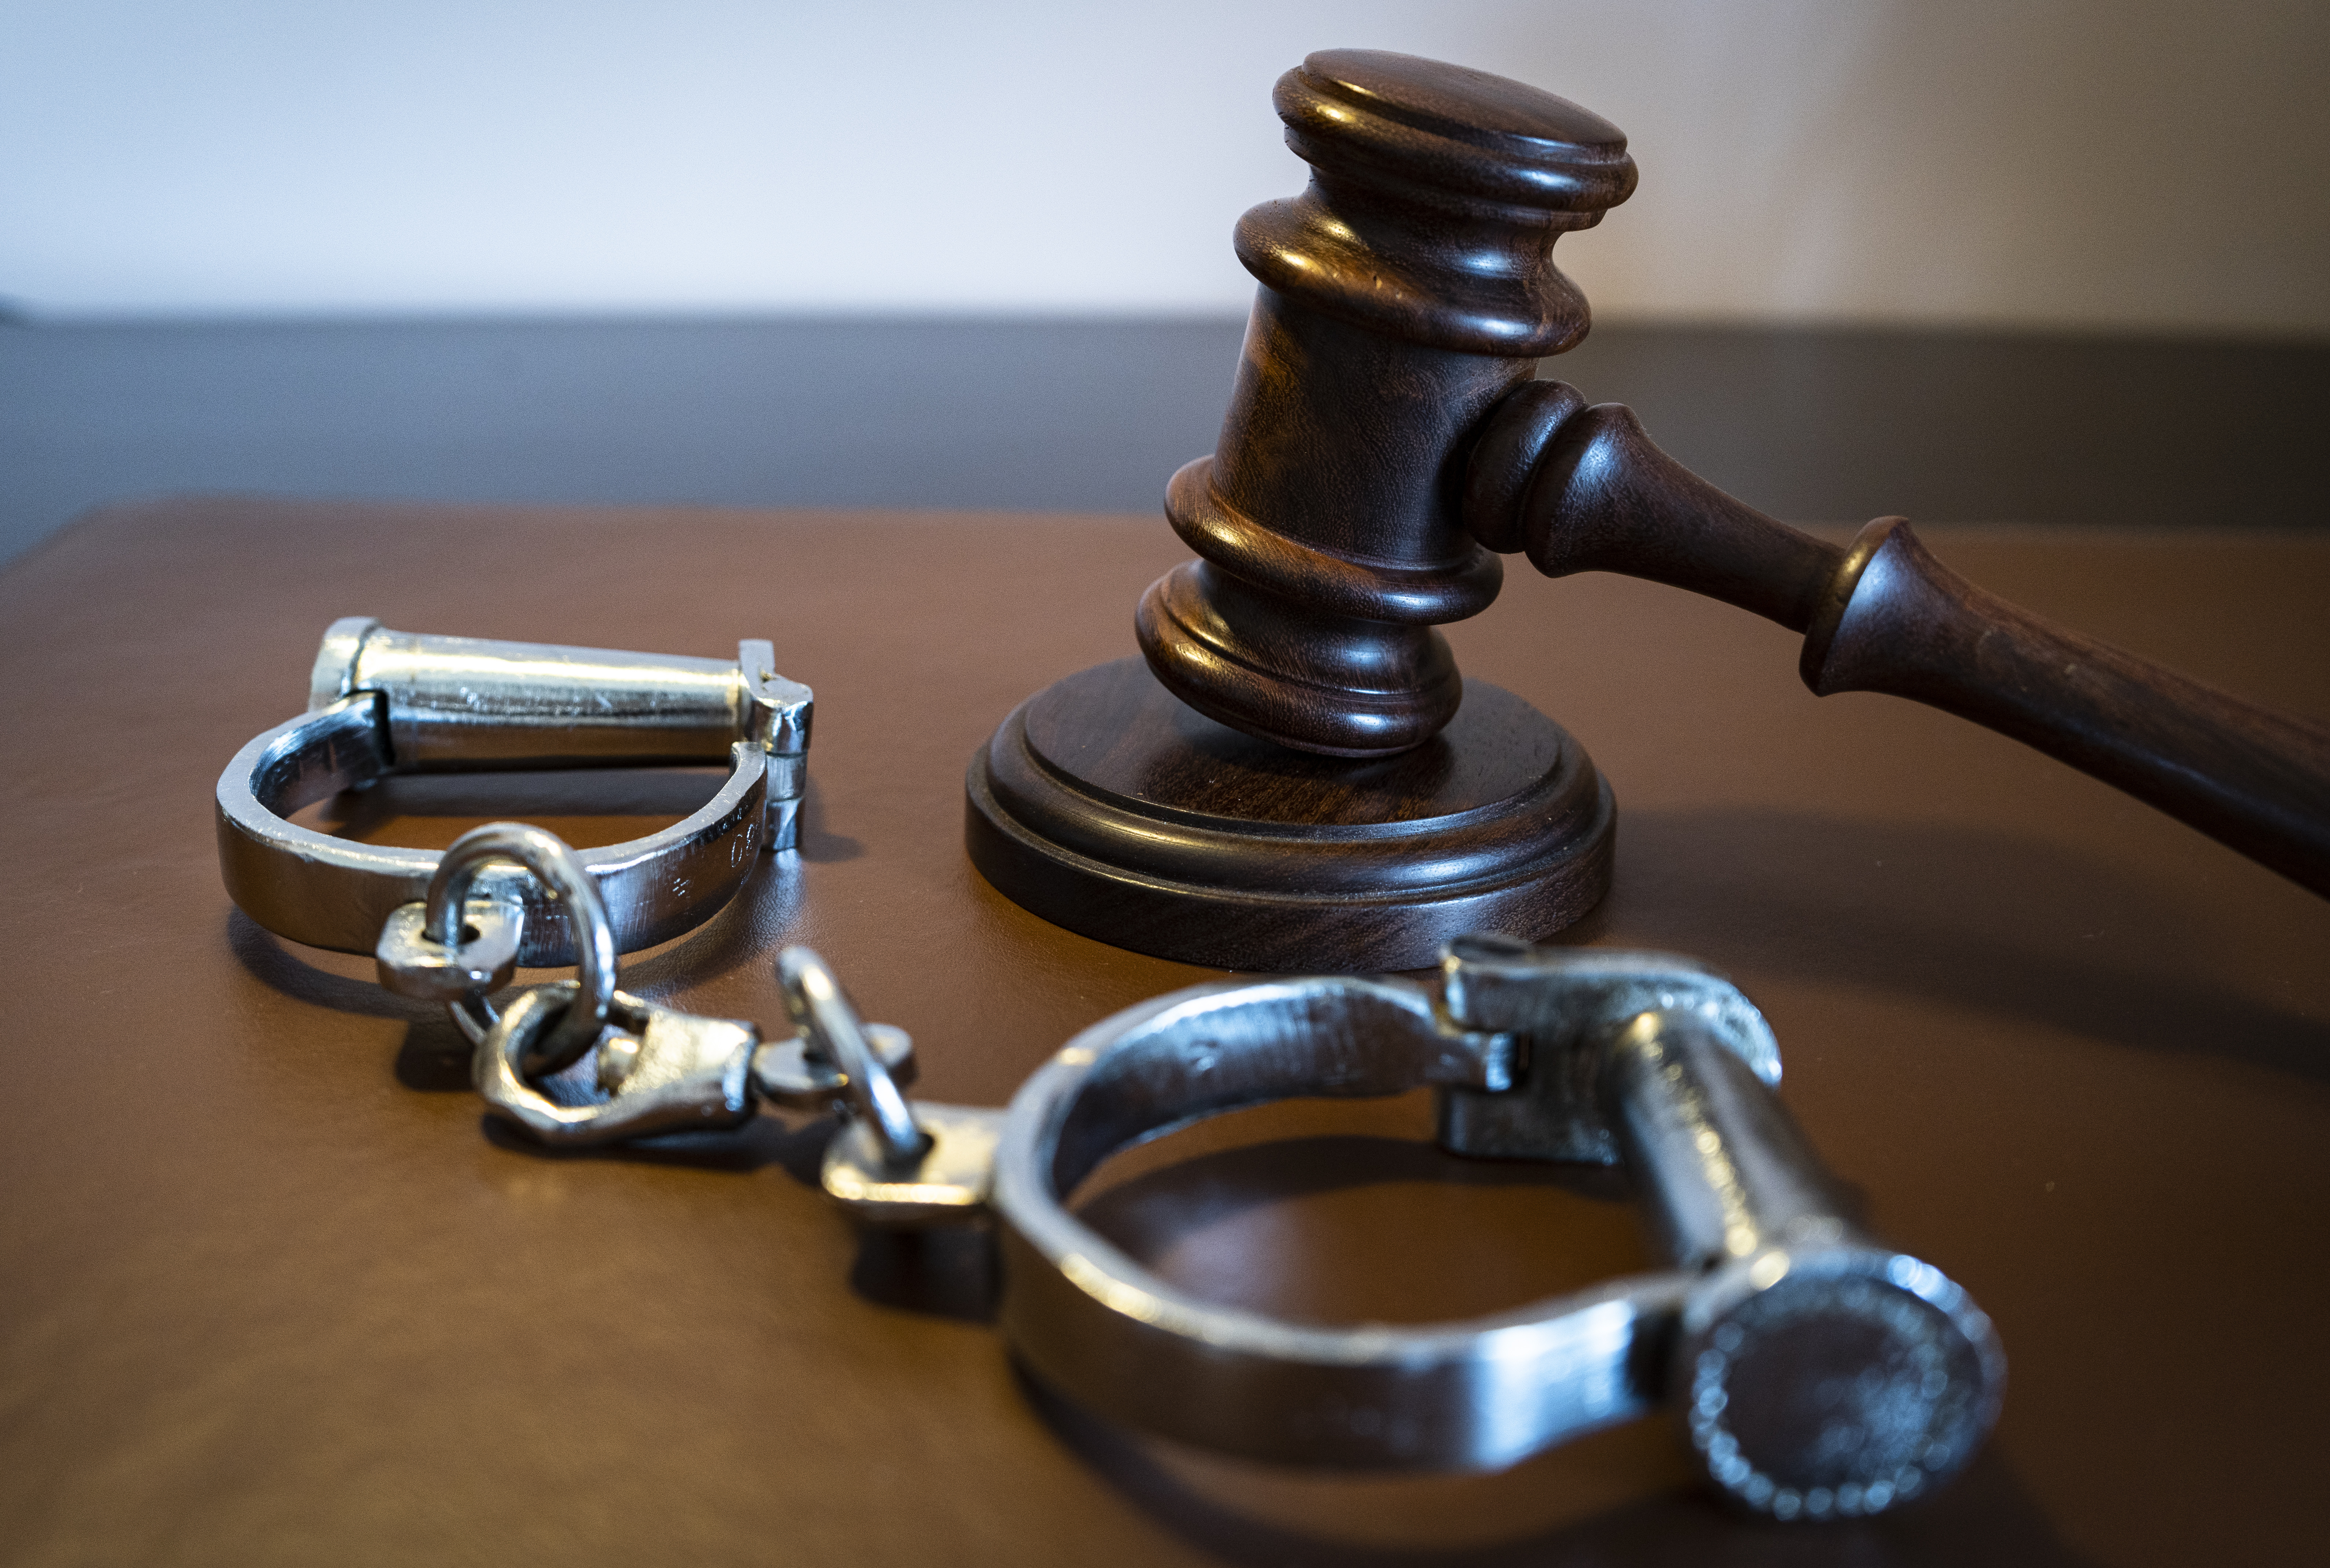 A pair of hsndcuffs and a judge's gavel | Source: Getty Images